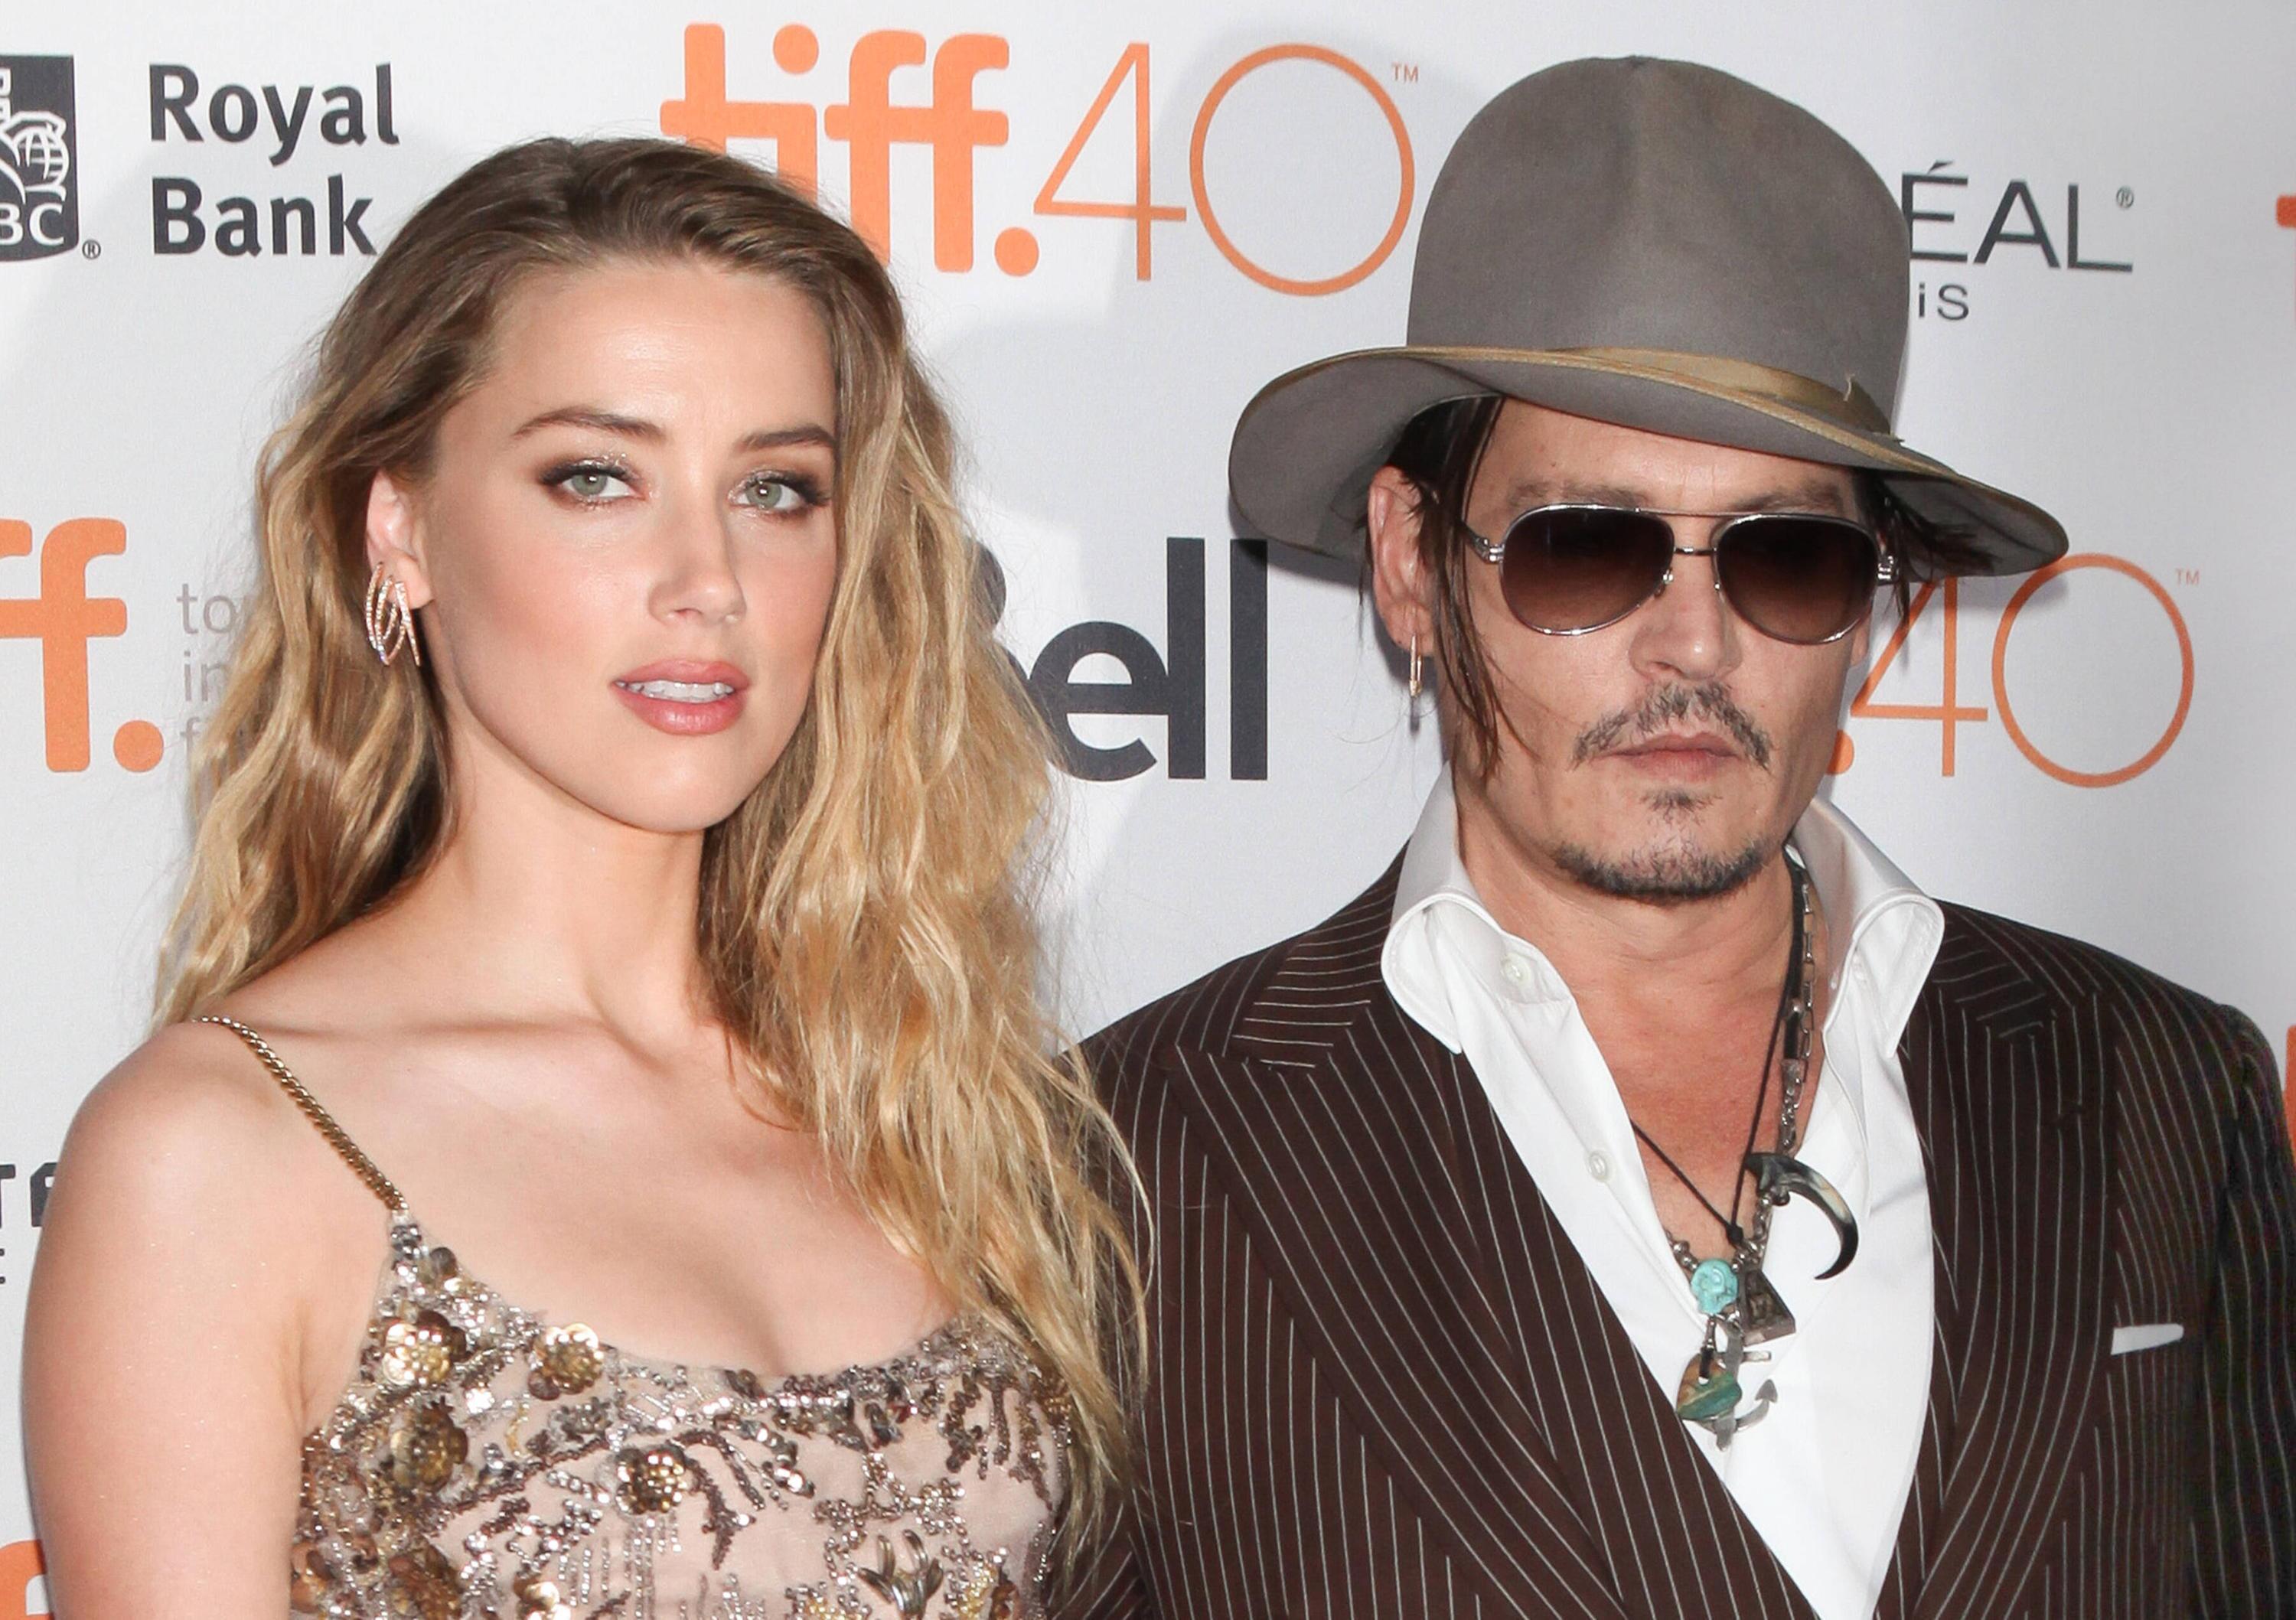 Amber Heard wearing a brown dress and Johnny Depp wearing a brown coat